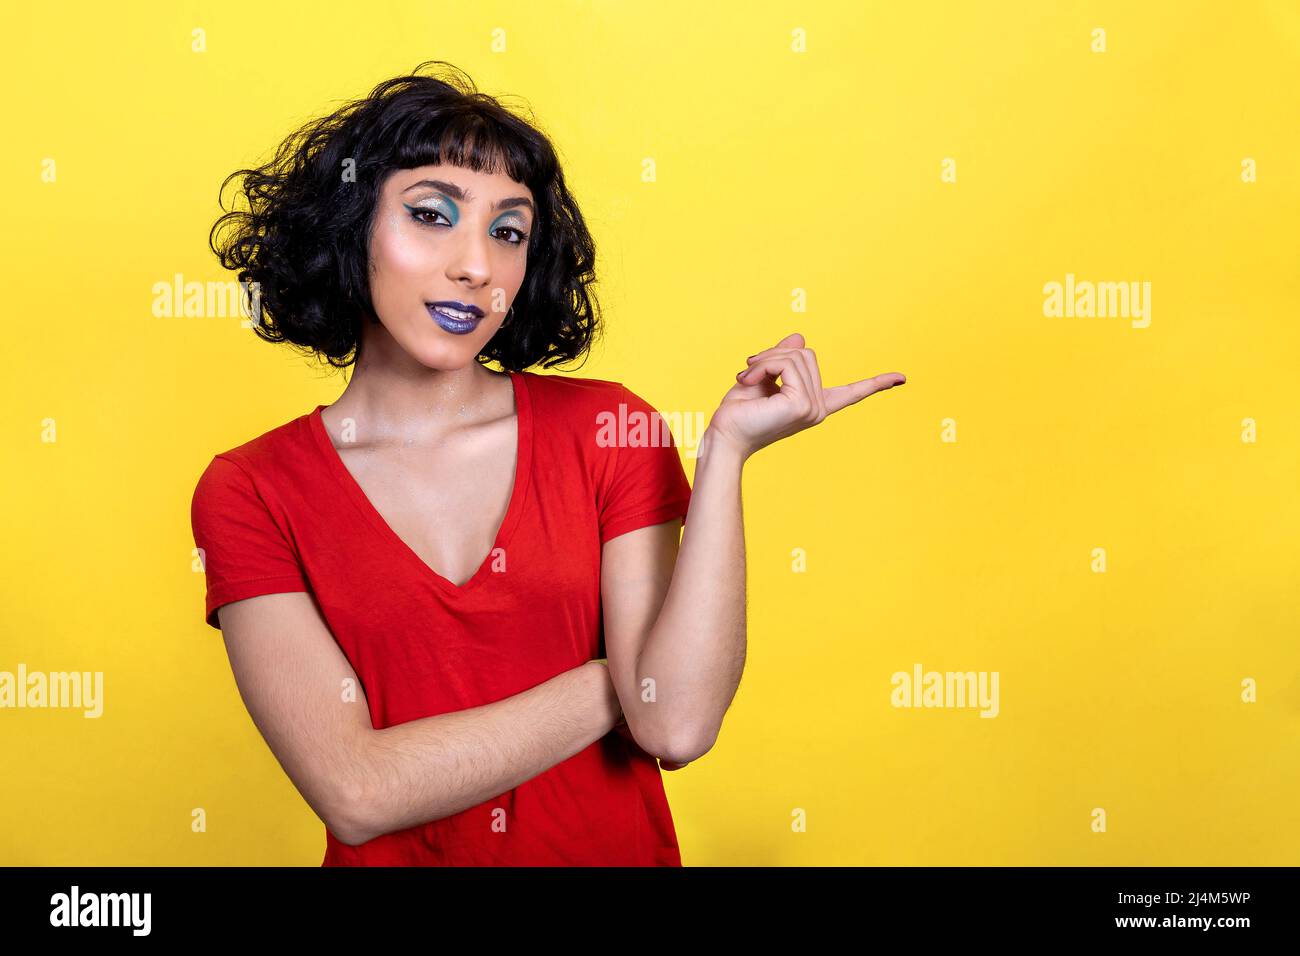 Smiling young woman in red t-shirt is pointing with her finger. Woman portrait with trendy look and bright colors on yellow background. Stock Photo